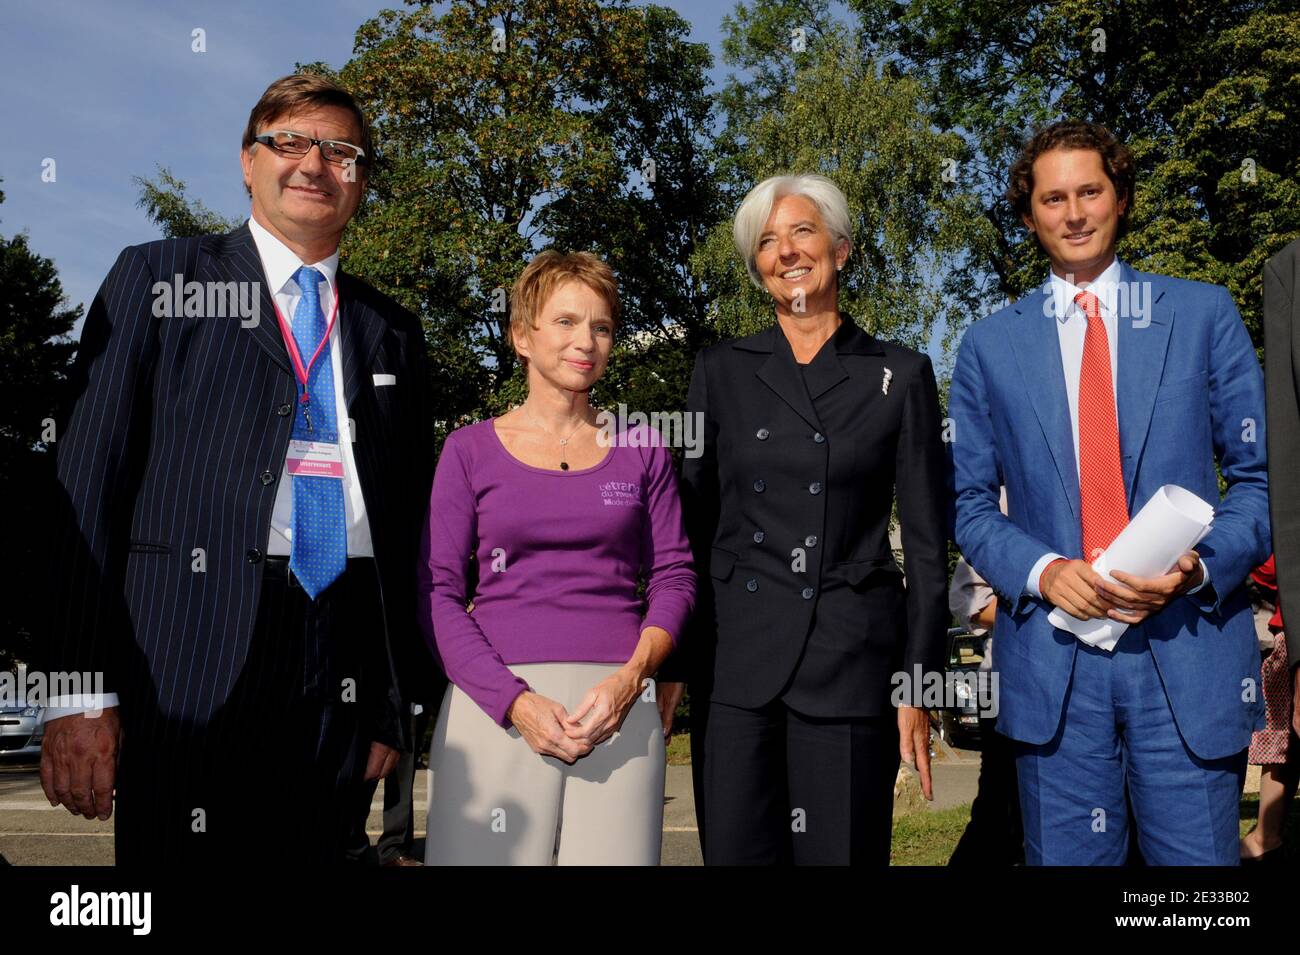 Laurence Parisot, Christine Lagarde, Geox CEO Mario Moretti Polegato (L)  and Fiat CEO John Elkann (R) arrive at the Medef Summer University  conference in Jouy-en-Josas, near Paris, France, on September 1, 2010.